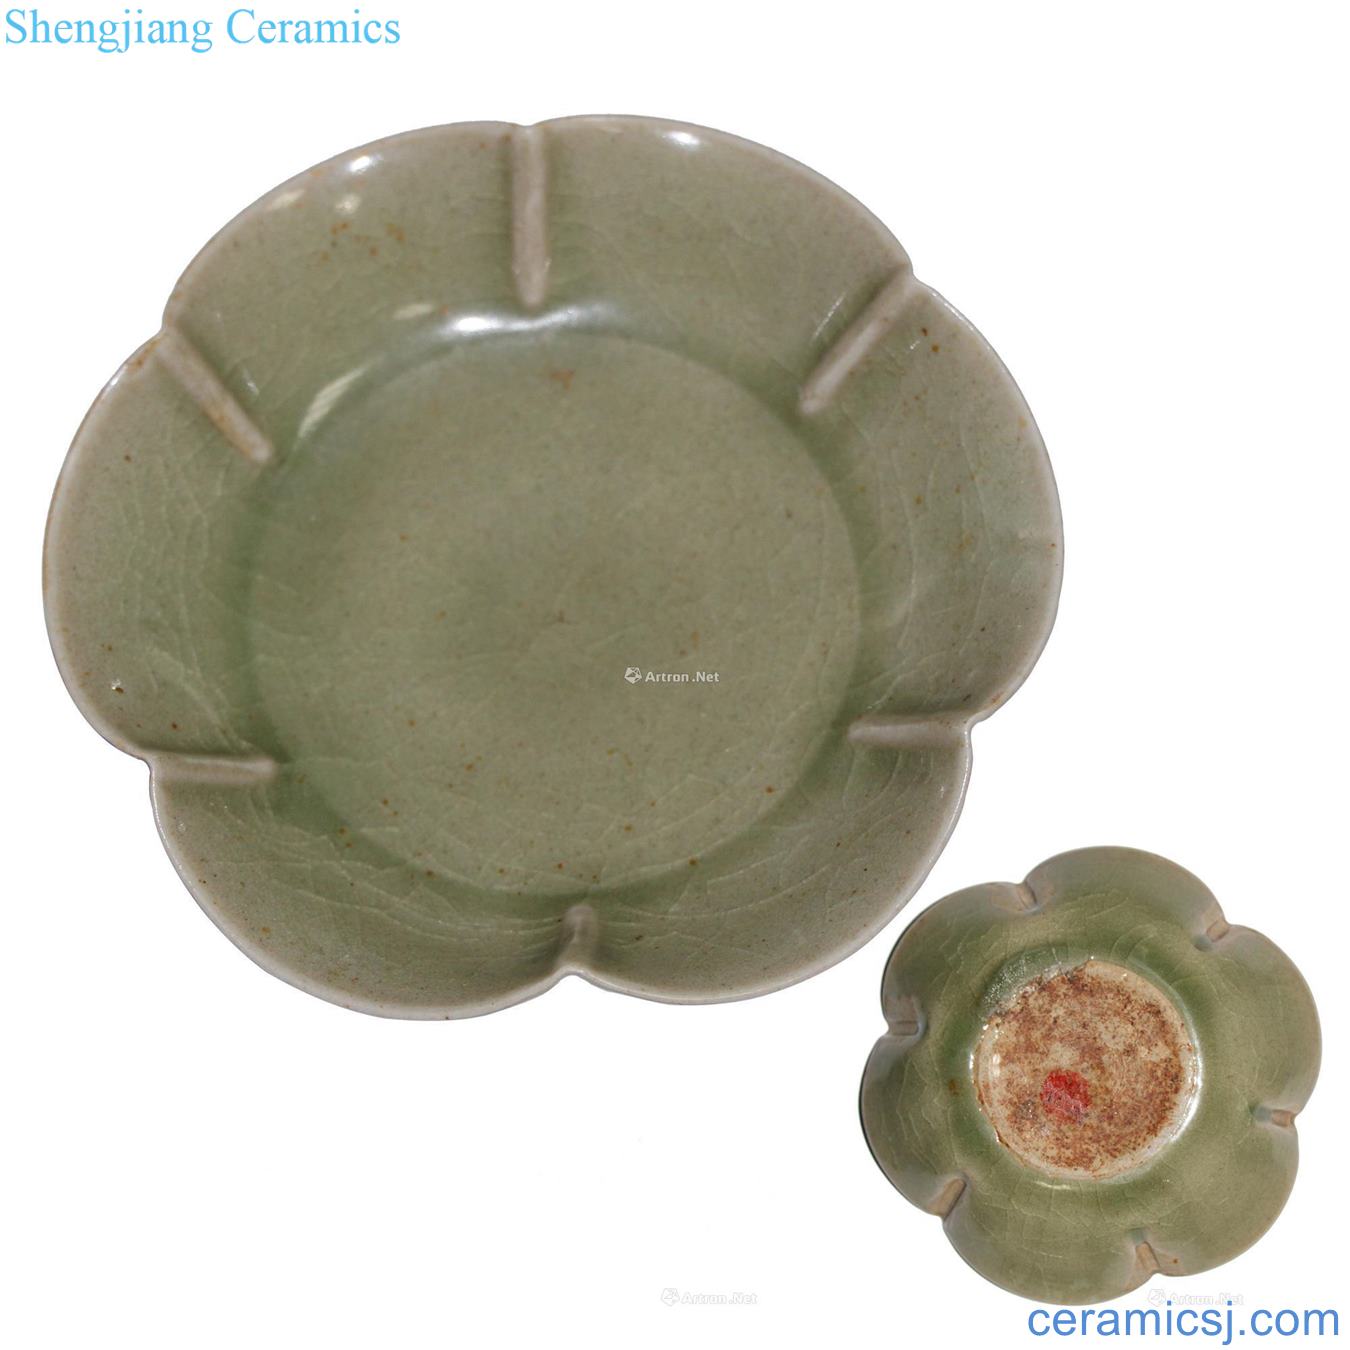 The song dynasty Yao state kiln mouth tray